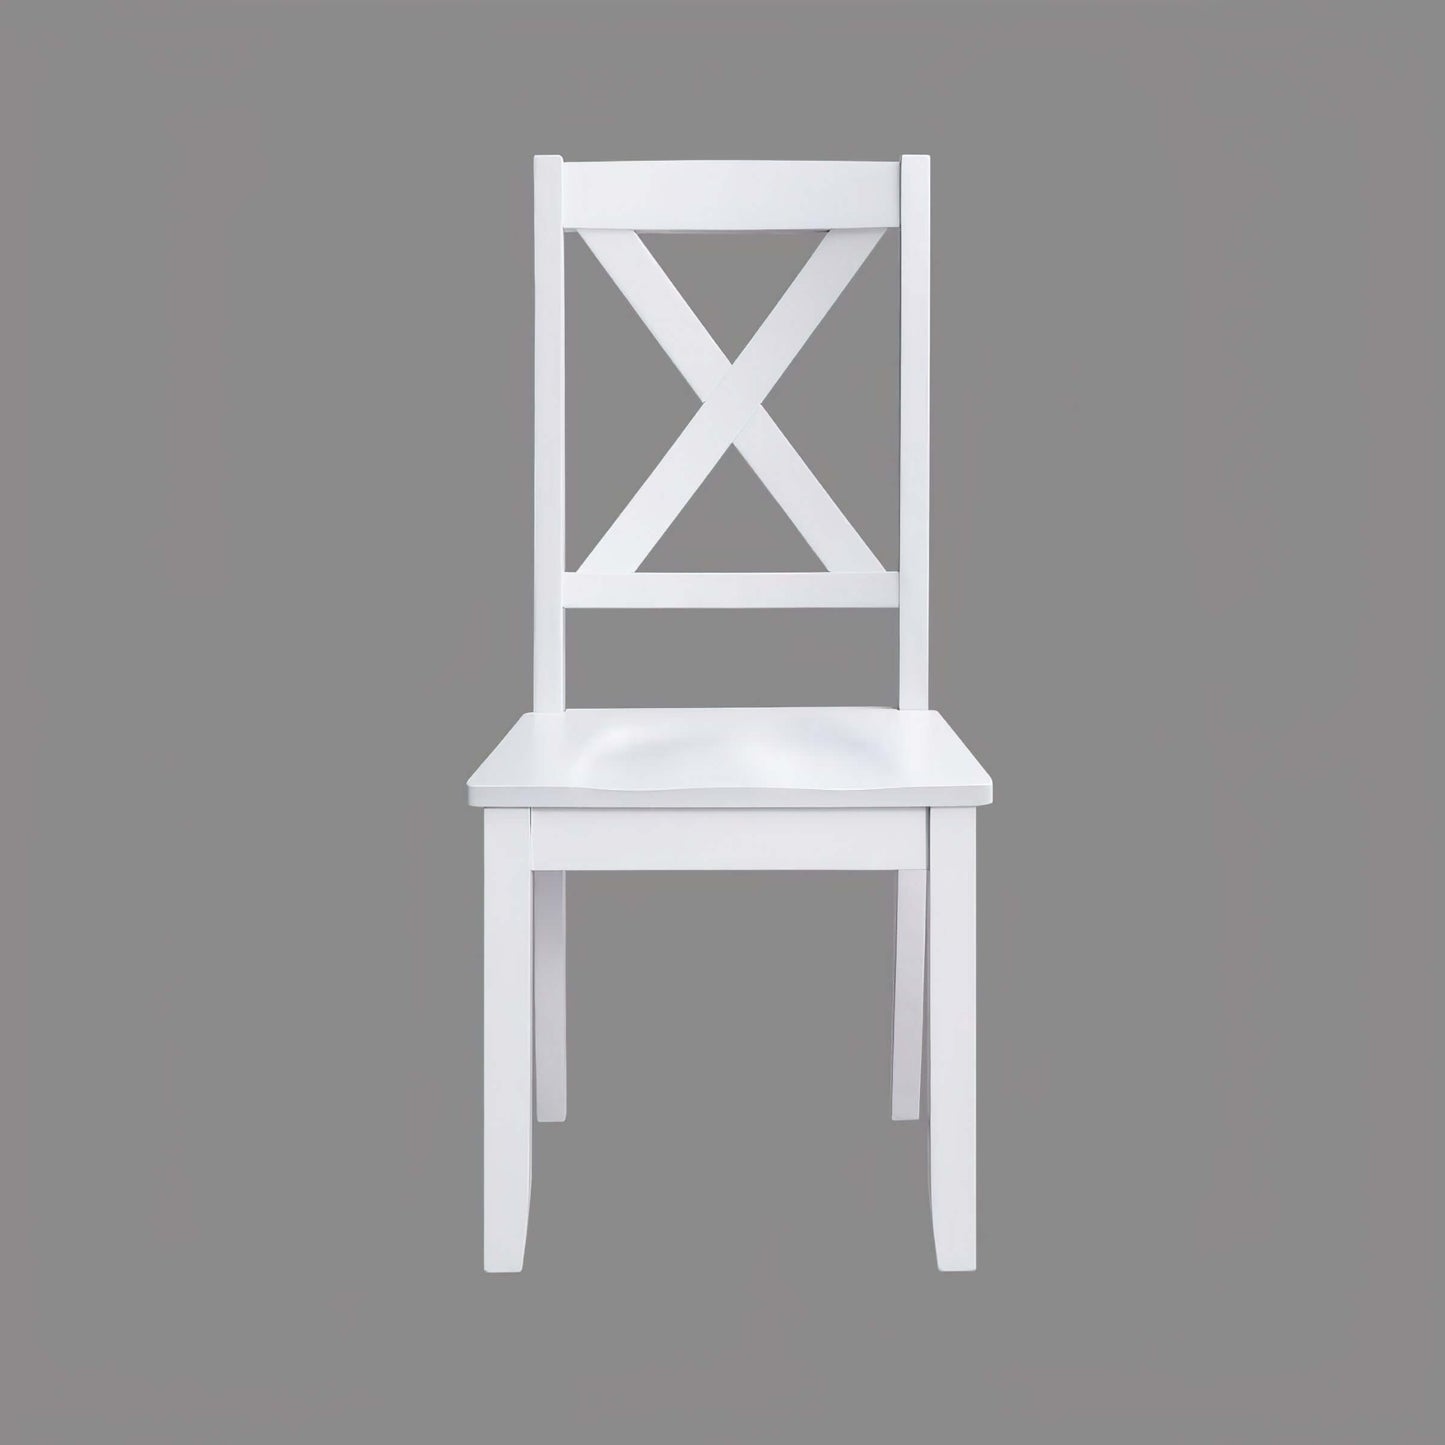 WETA® Crossing Dining Chairs, Set of 2